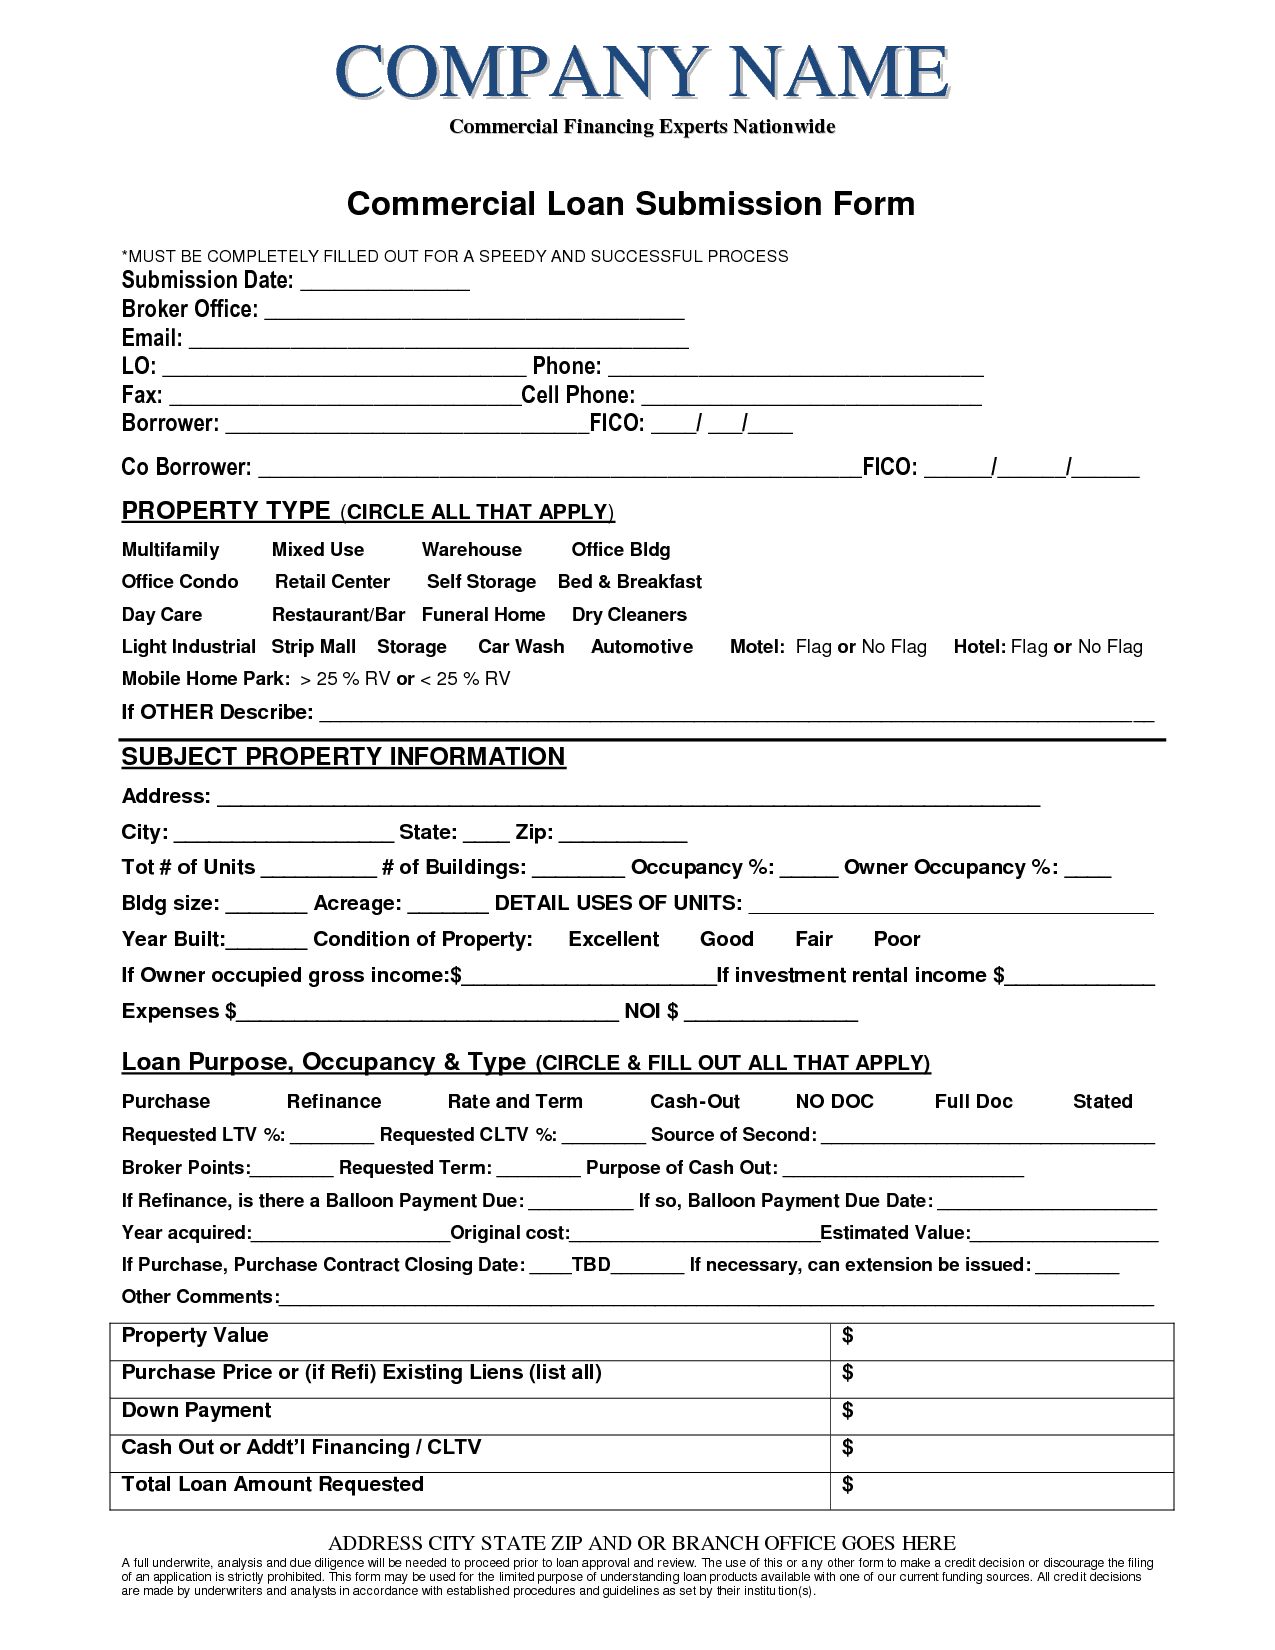 Allstate Life Insurance Company Forms